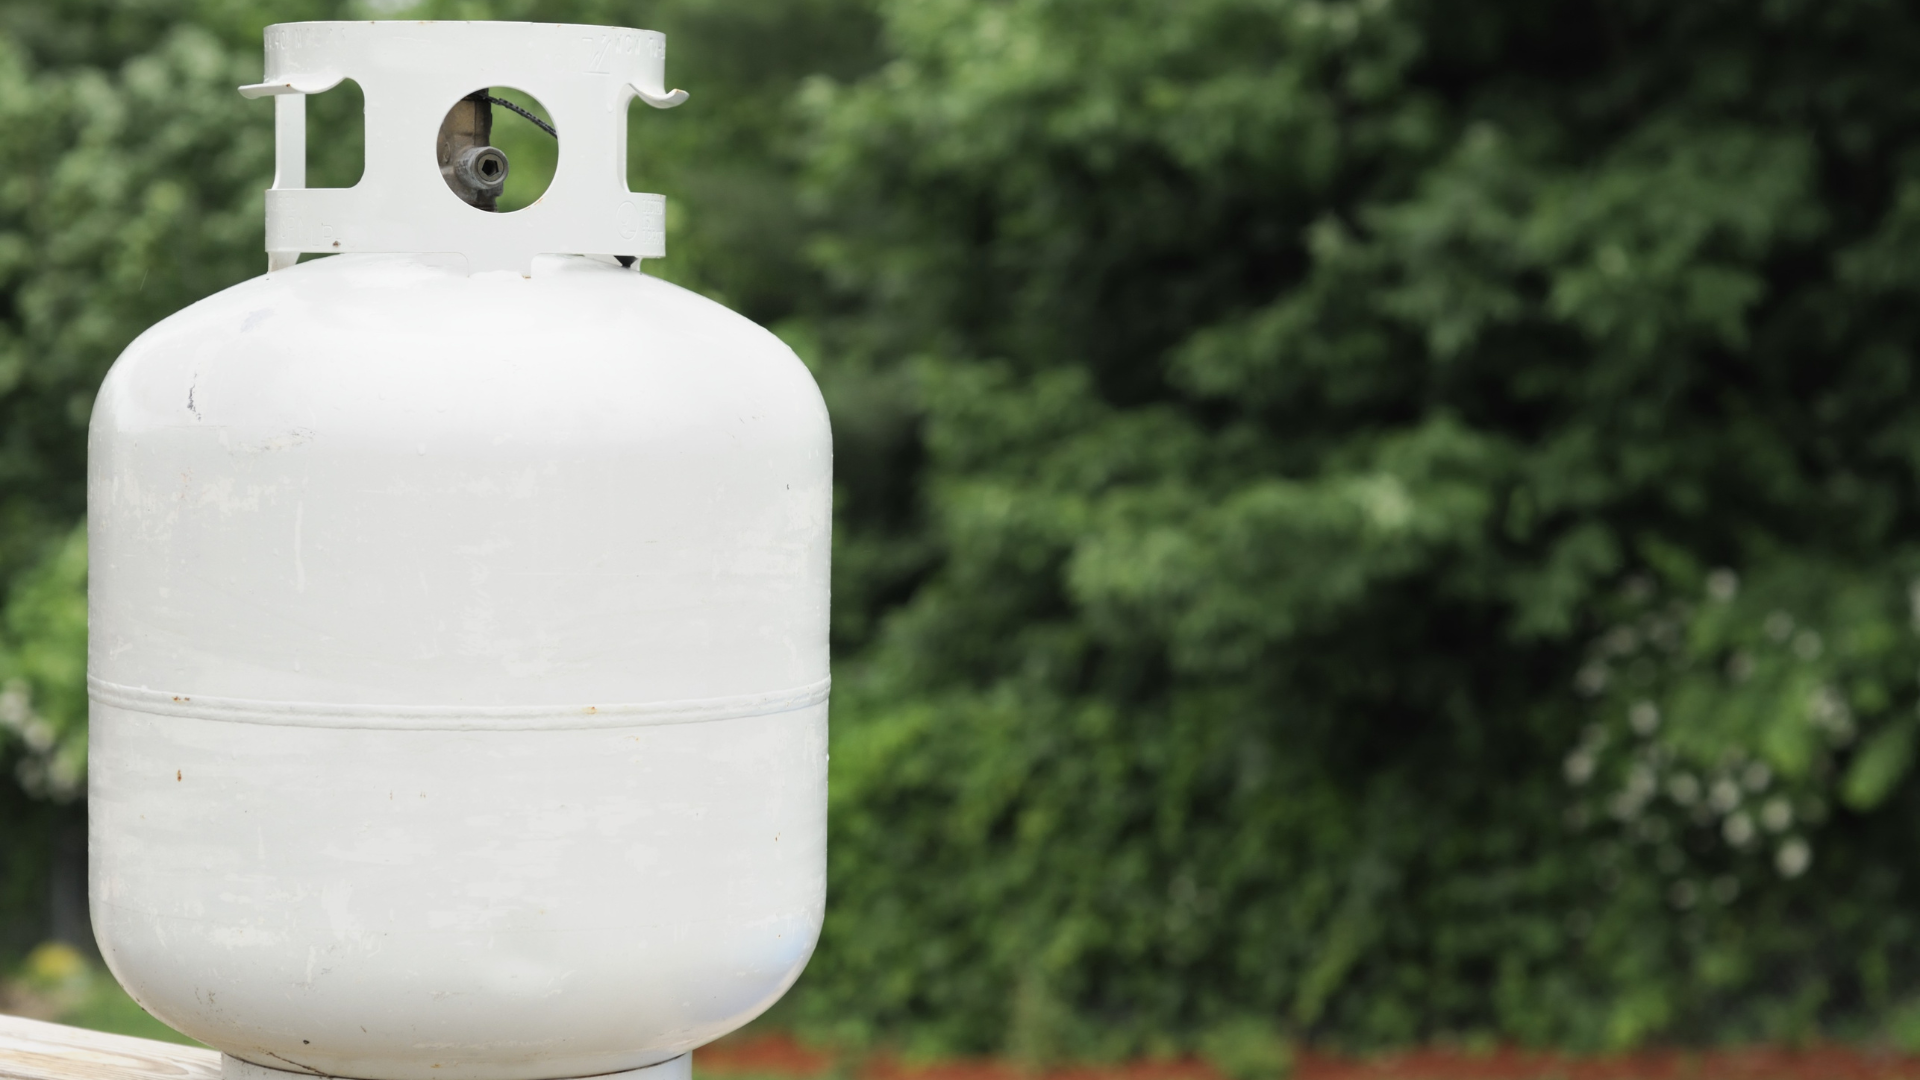 Risks Involved in Refilling Single-Use TC-39M/DOT-39 (Non-Refillable) Propane Cylinders